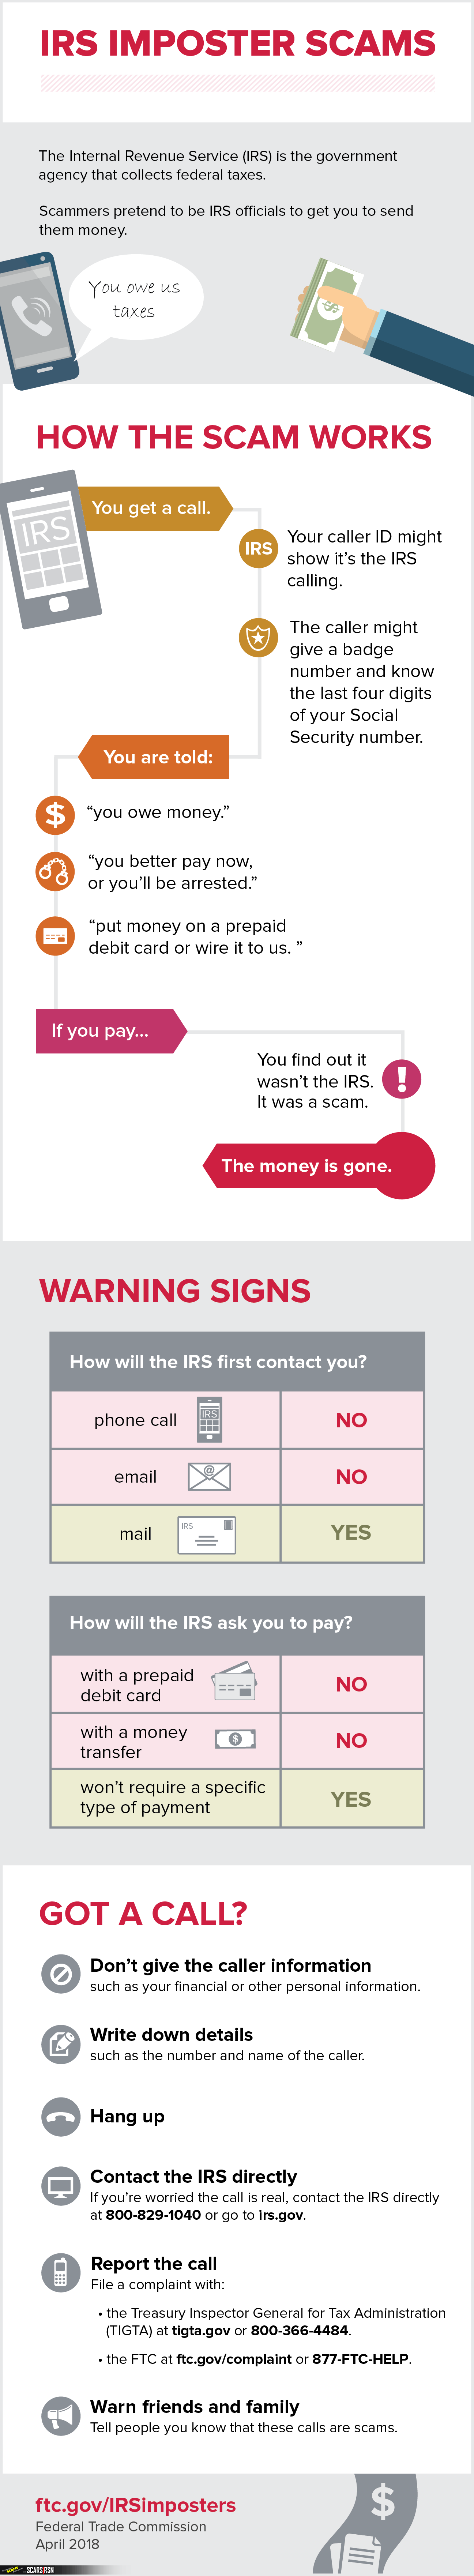 Official FTC IRS Imposter Scams Infographic